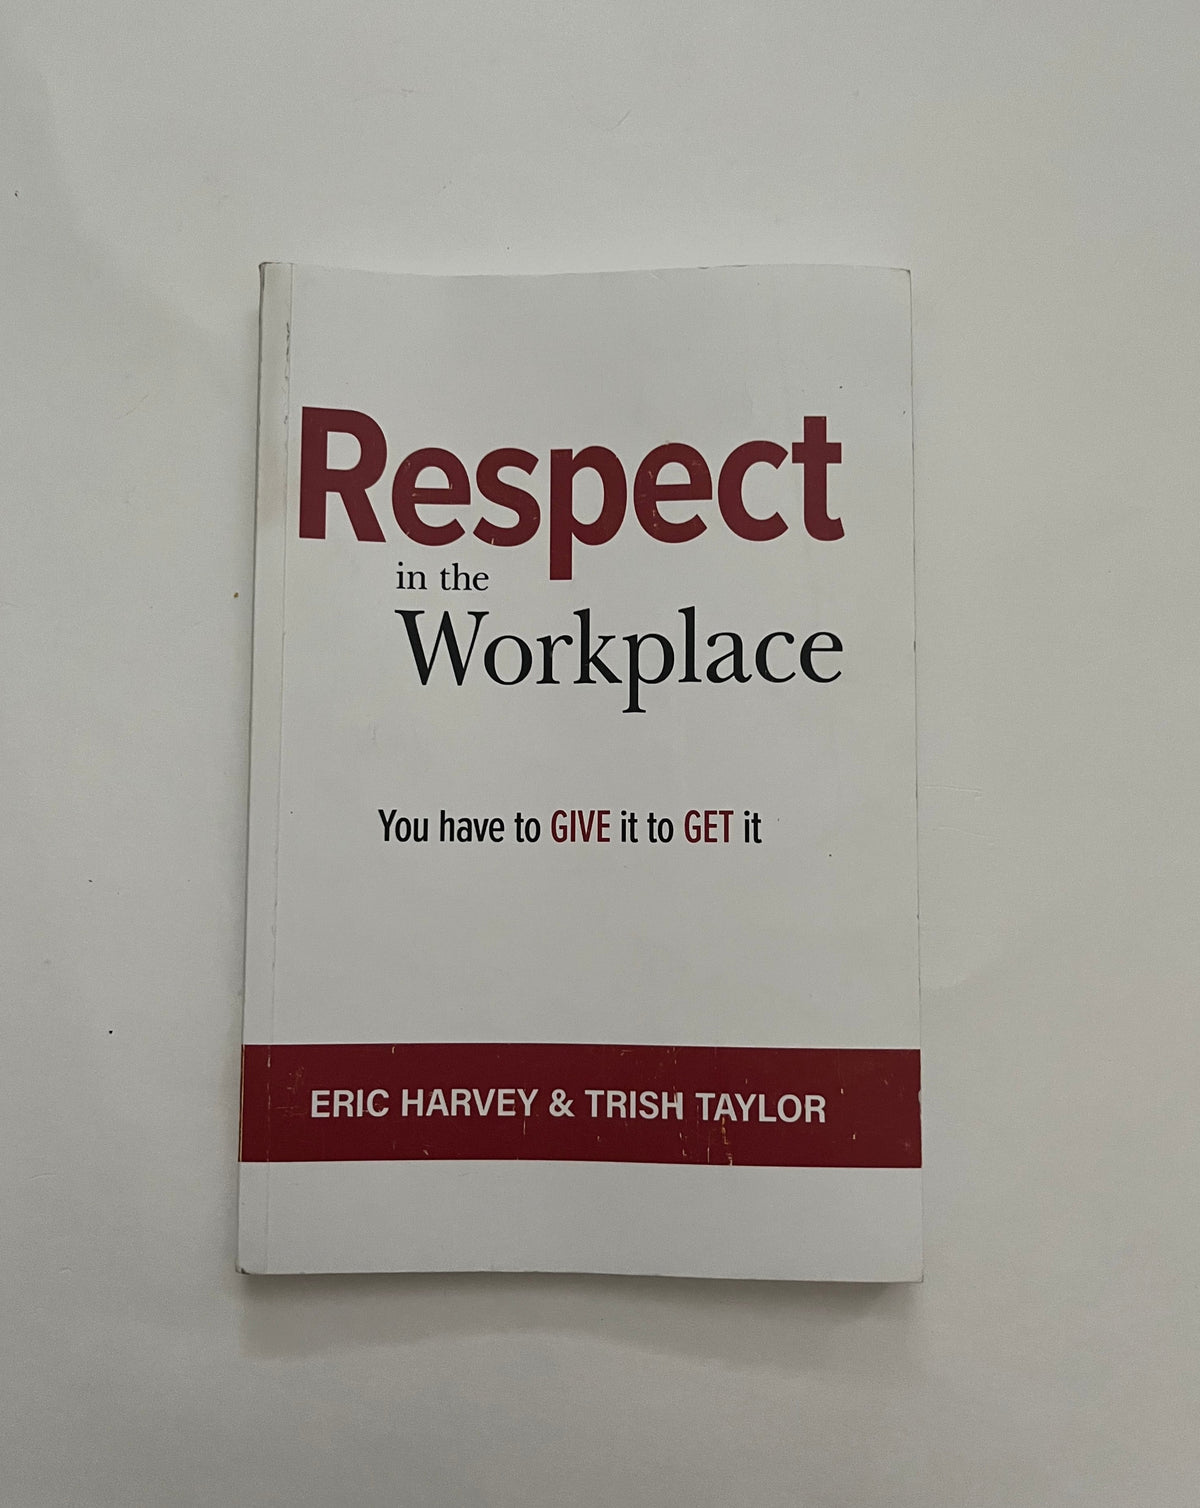 Respect in the Workplace: You Have to Give it to Get it by Eric Harvey &amp; Trish Taylor